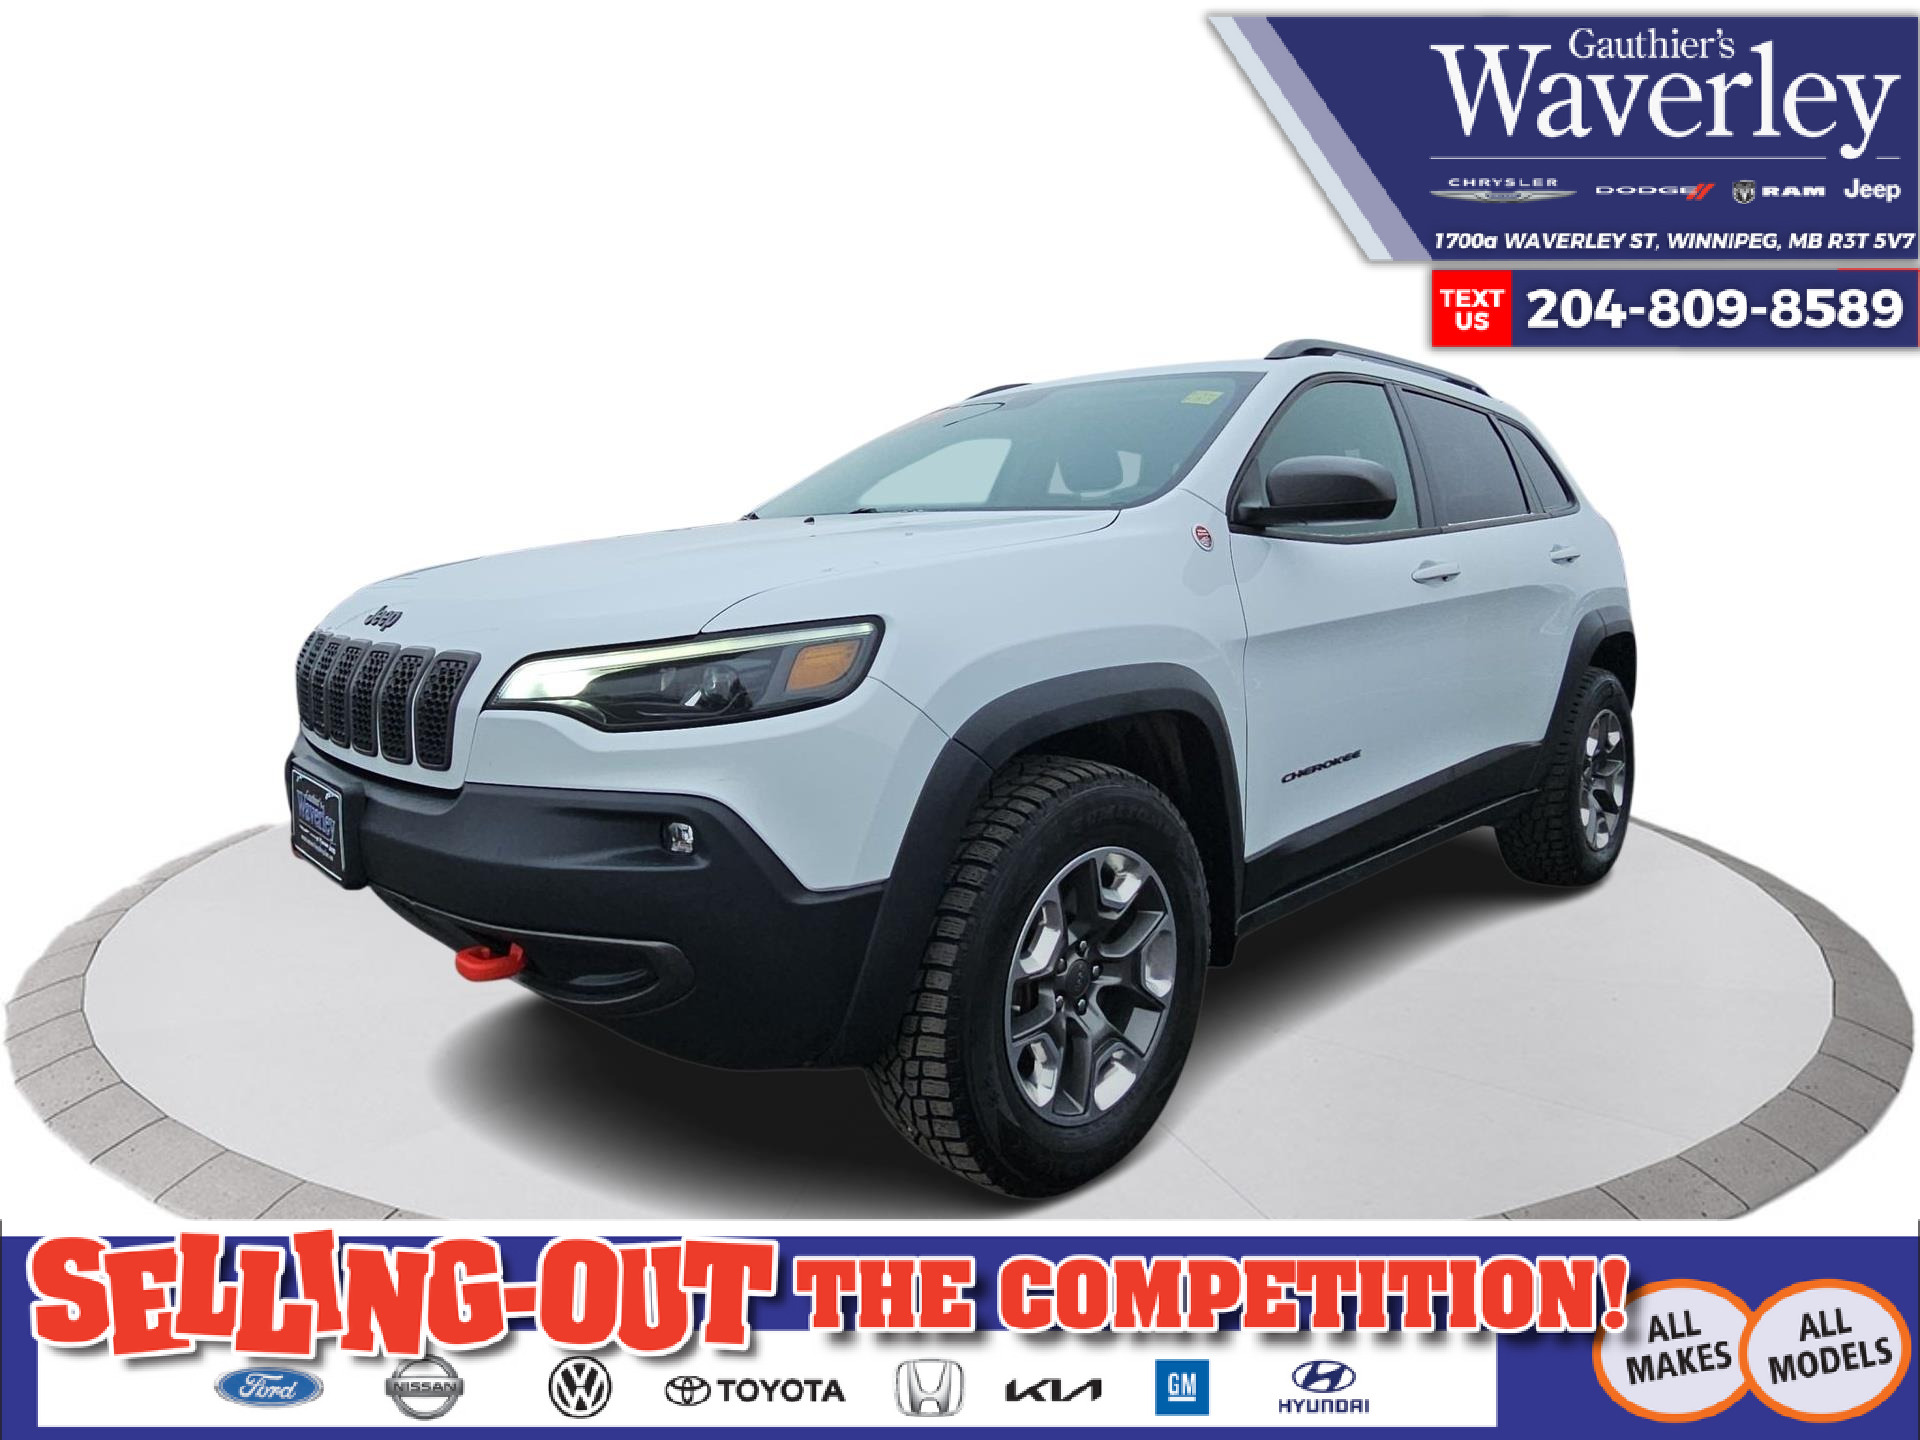 2019 Jeep Cherokee Trailhawk REMOTE START | HEATED SEATS | LEATHER | 